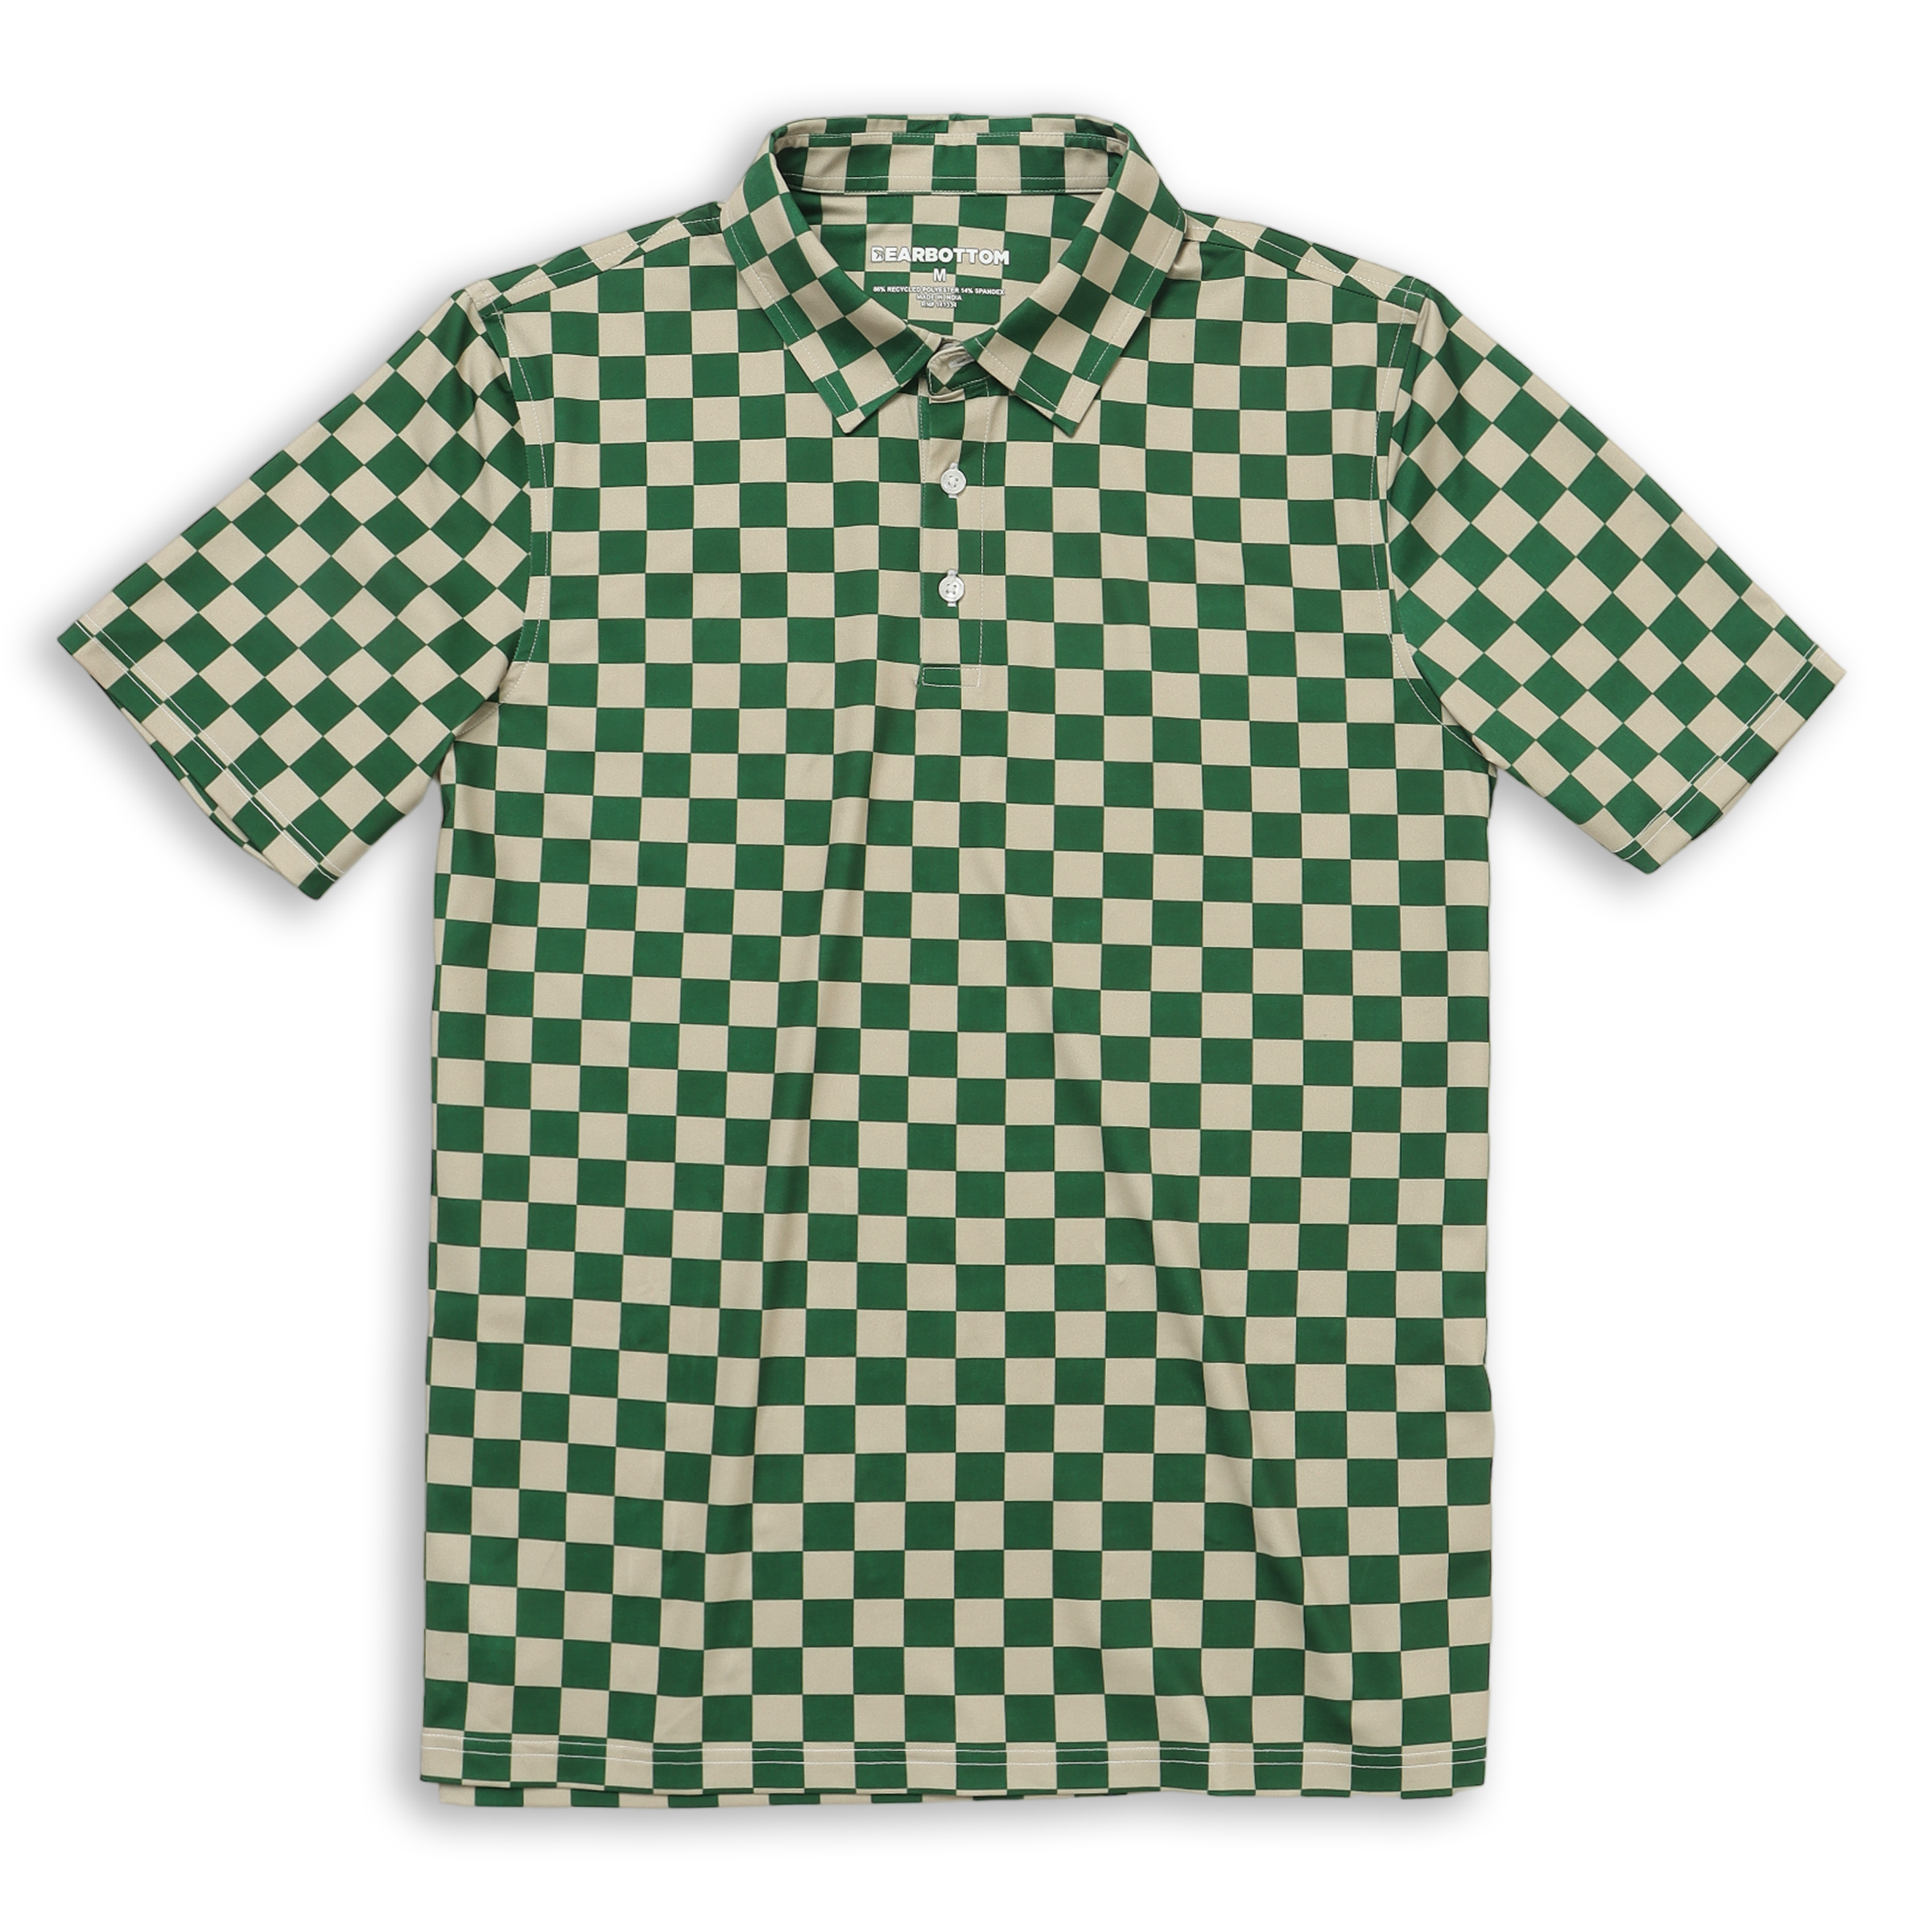 Performance Polo Green Checkers  front with collar, short sleeves, and 3 buttons.